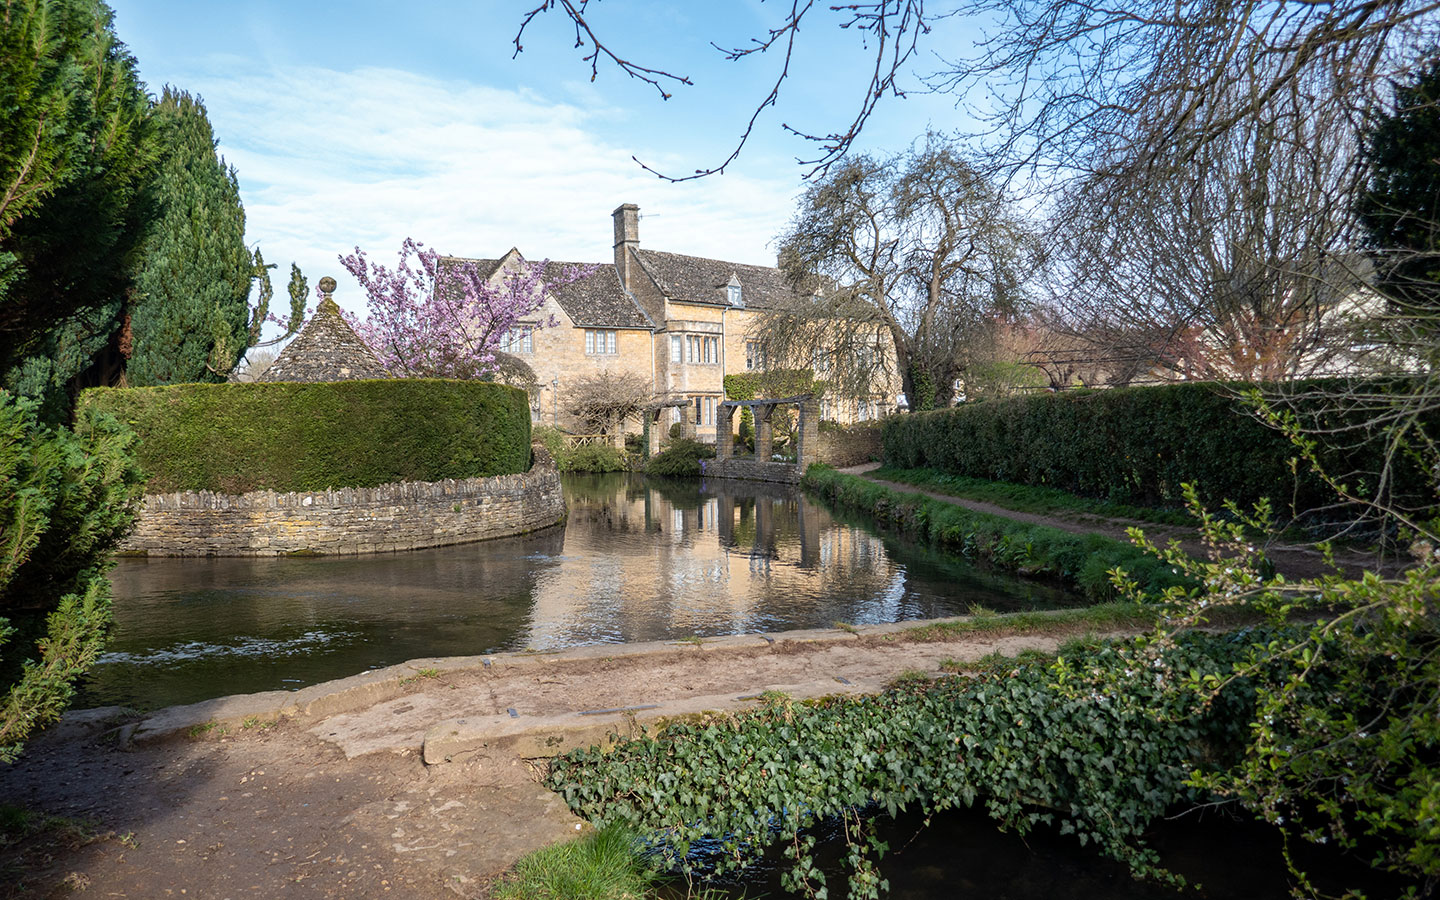 Bourton-on-the-Water mill house on the River Windrush